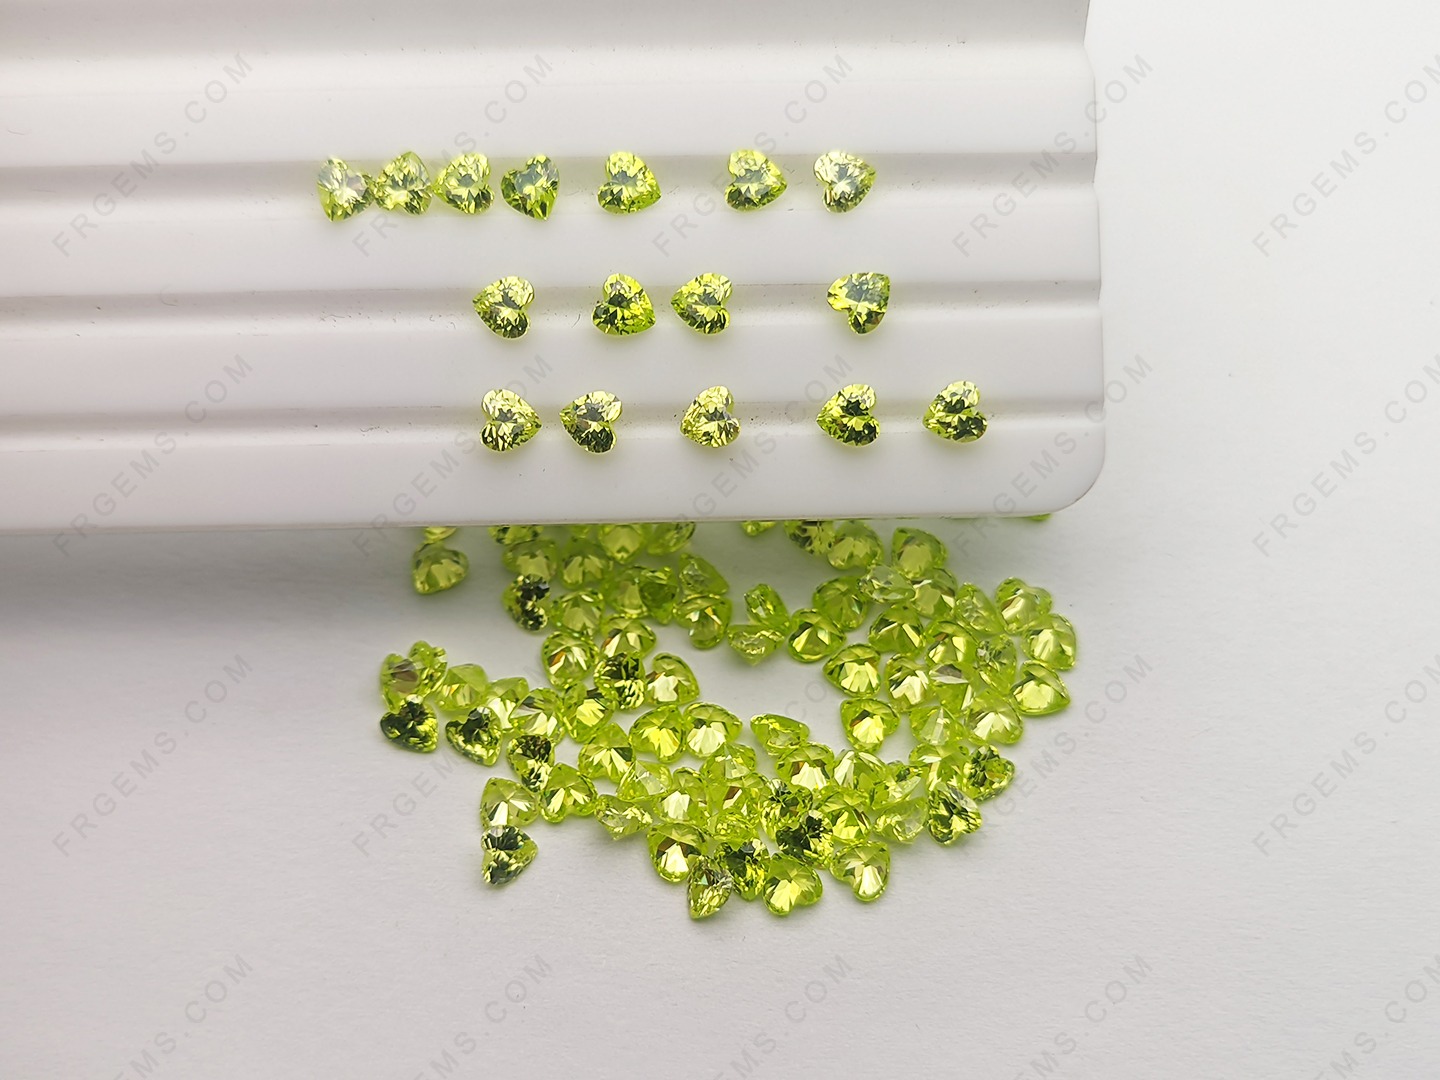 Buy Heart Shaped Faceted Cut Loose Cubic Zirconia Apple Green Color 4x4mm gemstones wholesale